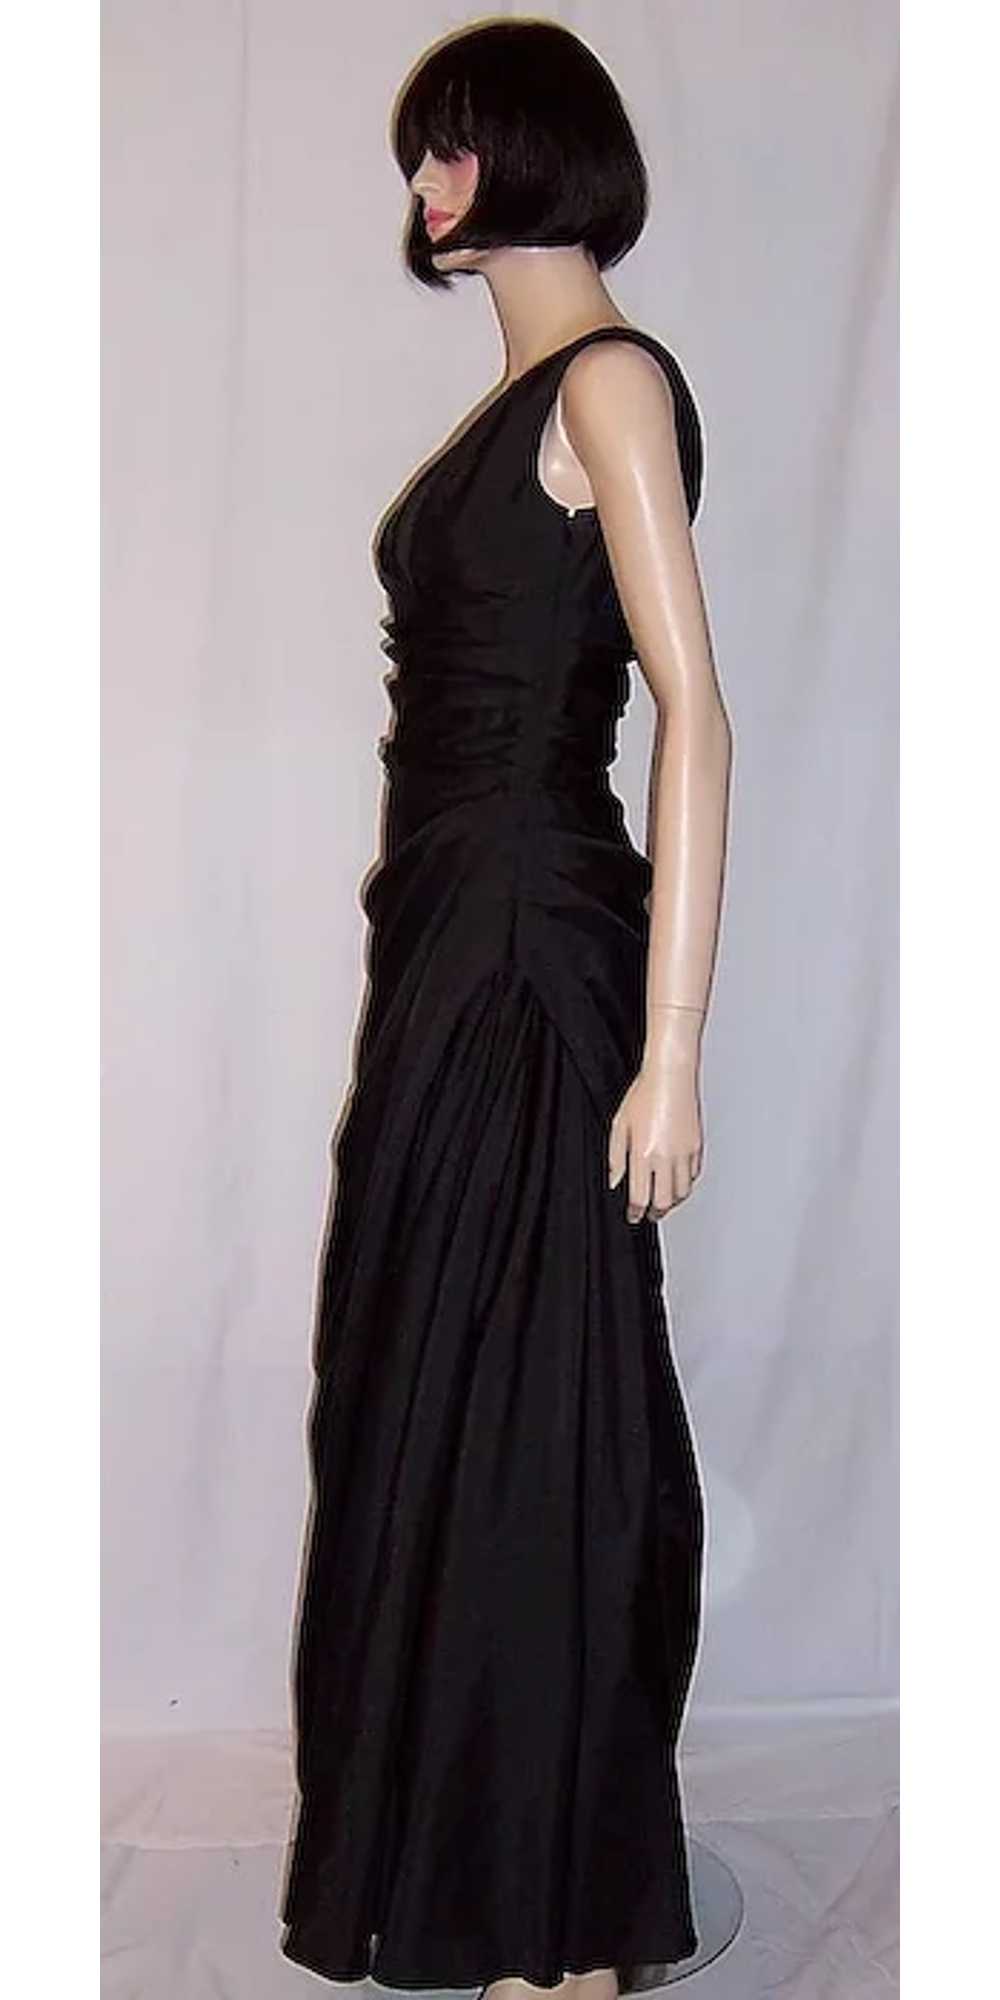 Black Sleeveless Floor Length Gown with Ruching - image 2